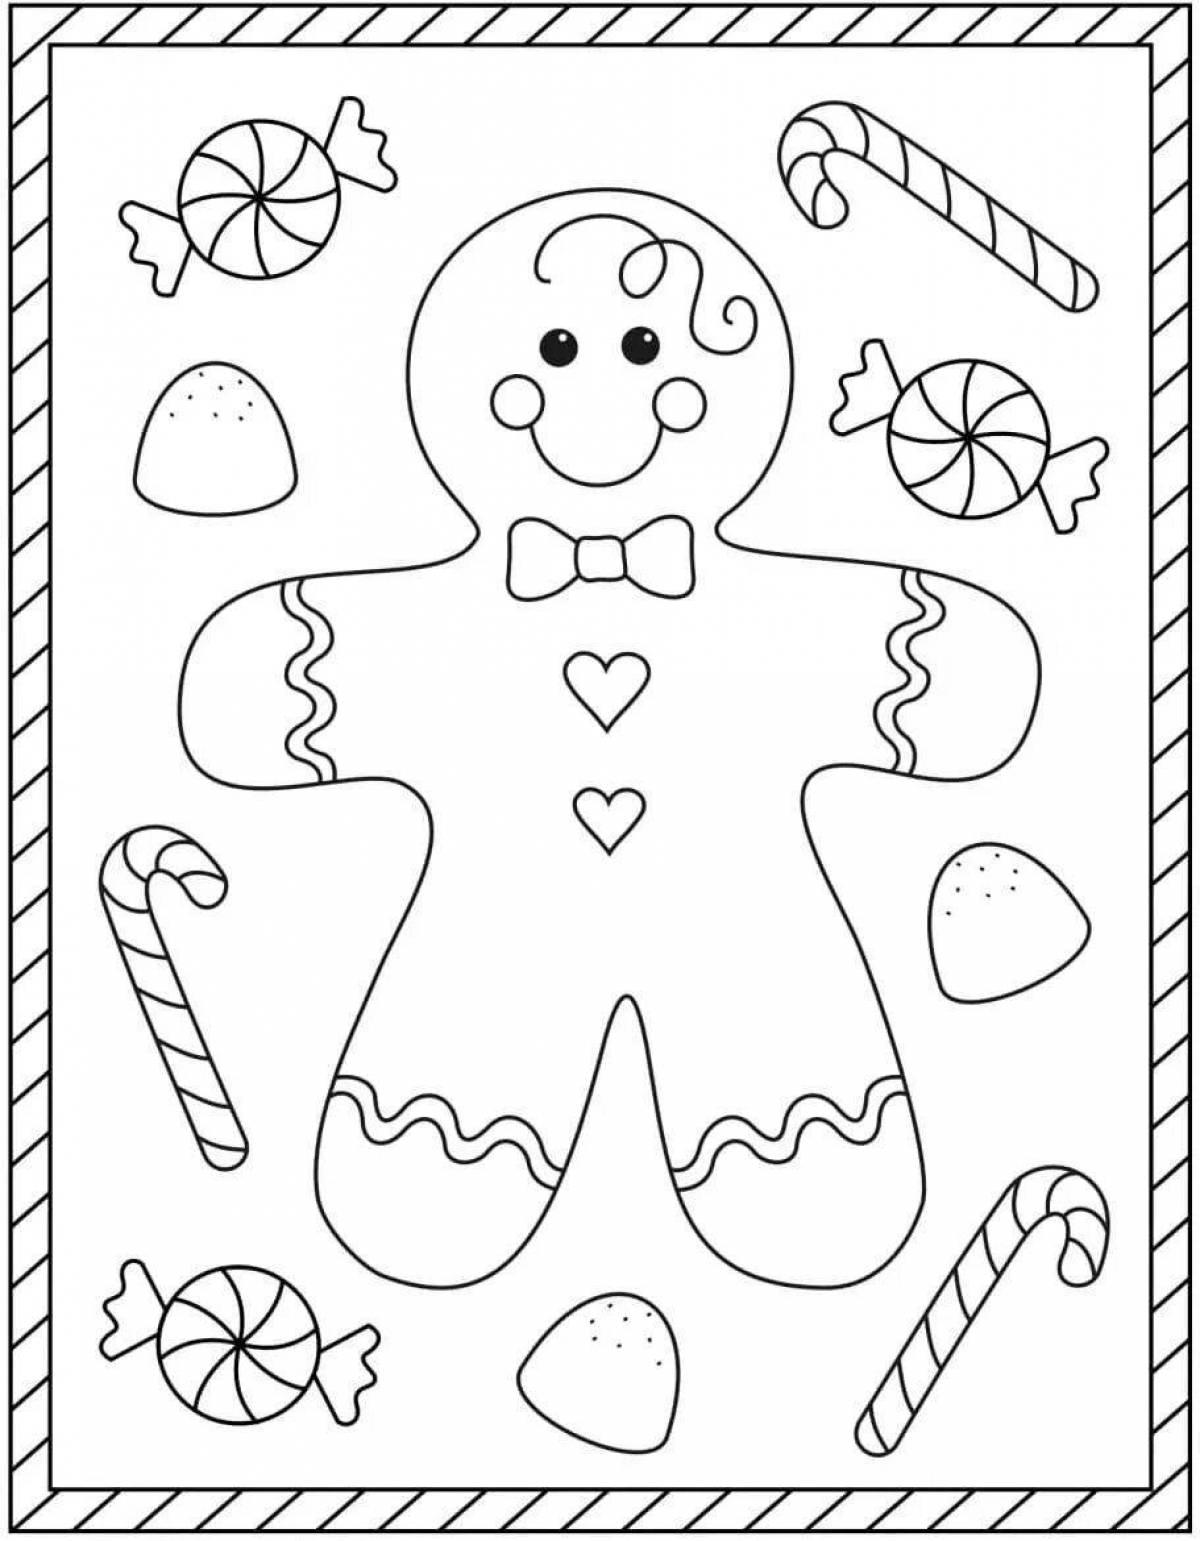 Coloring book exquisite gingerbread man